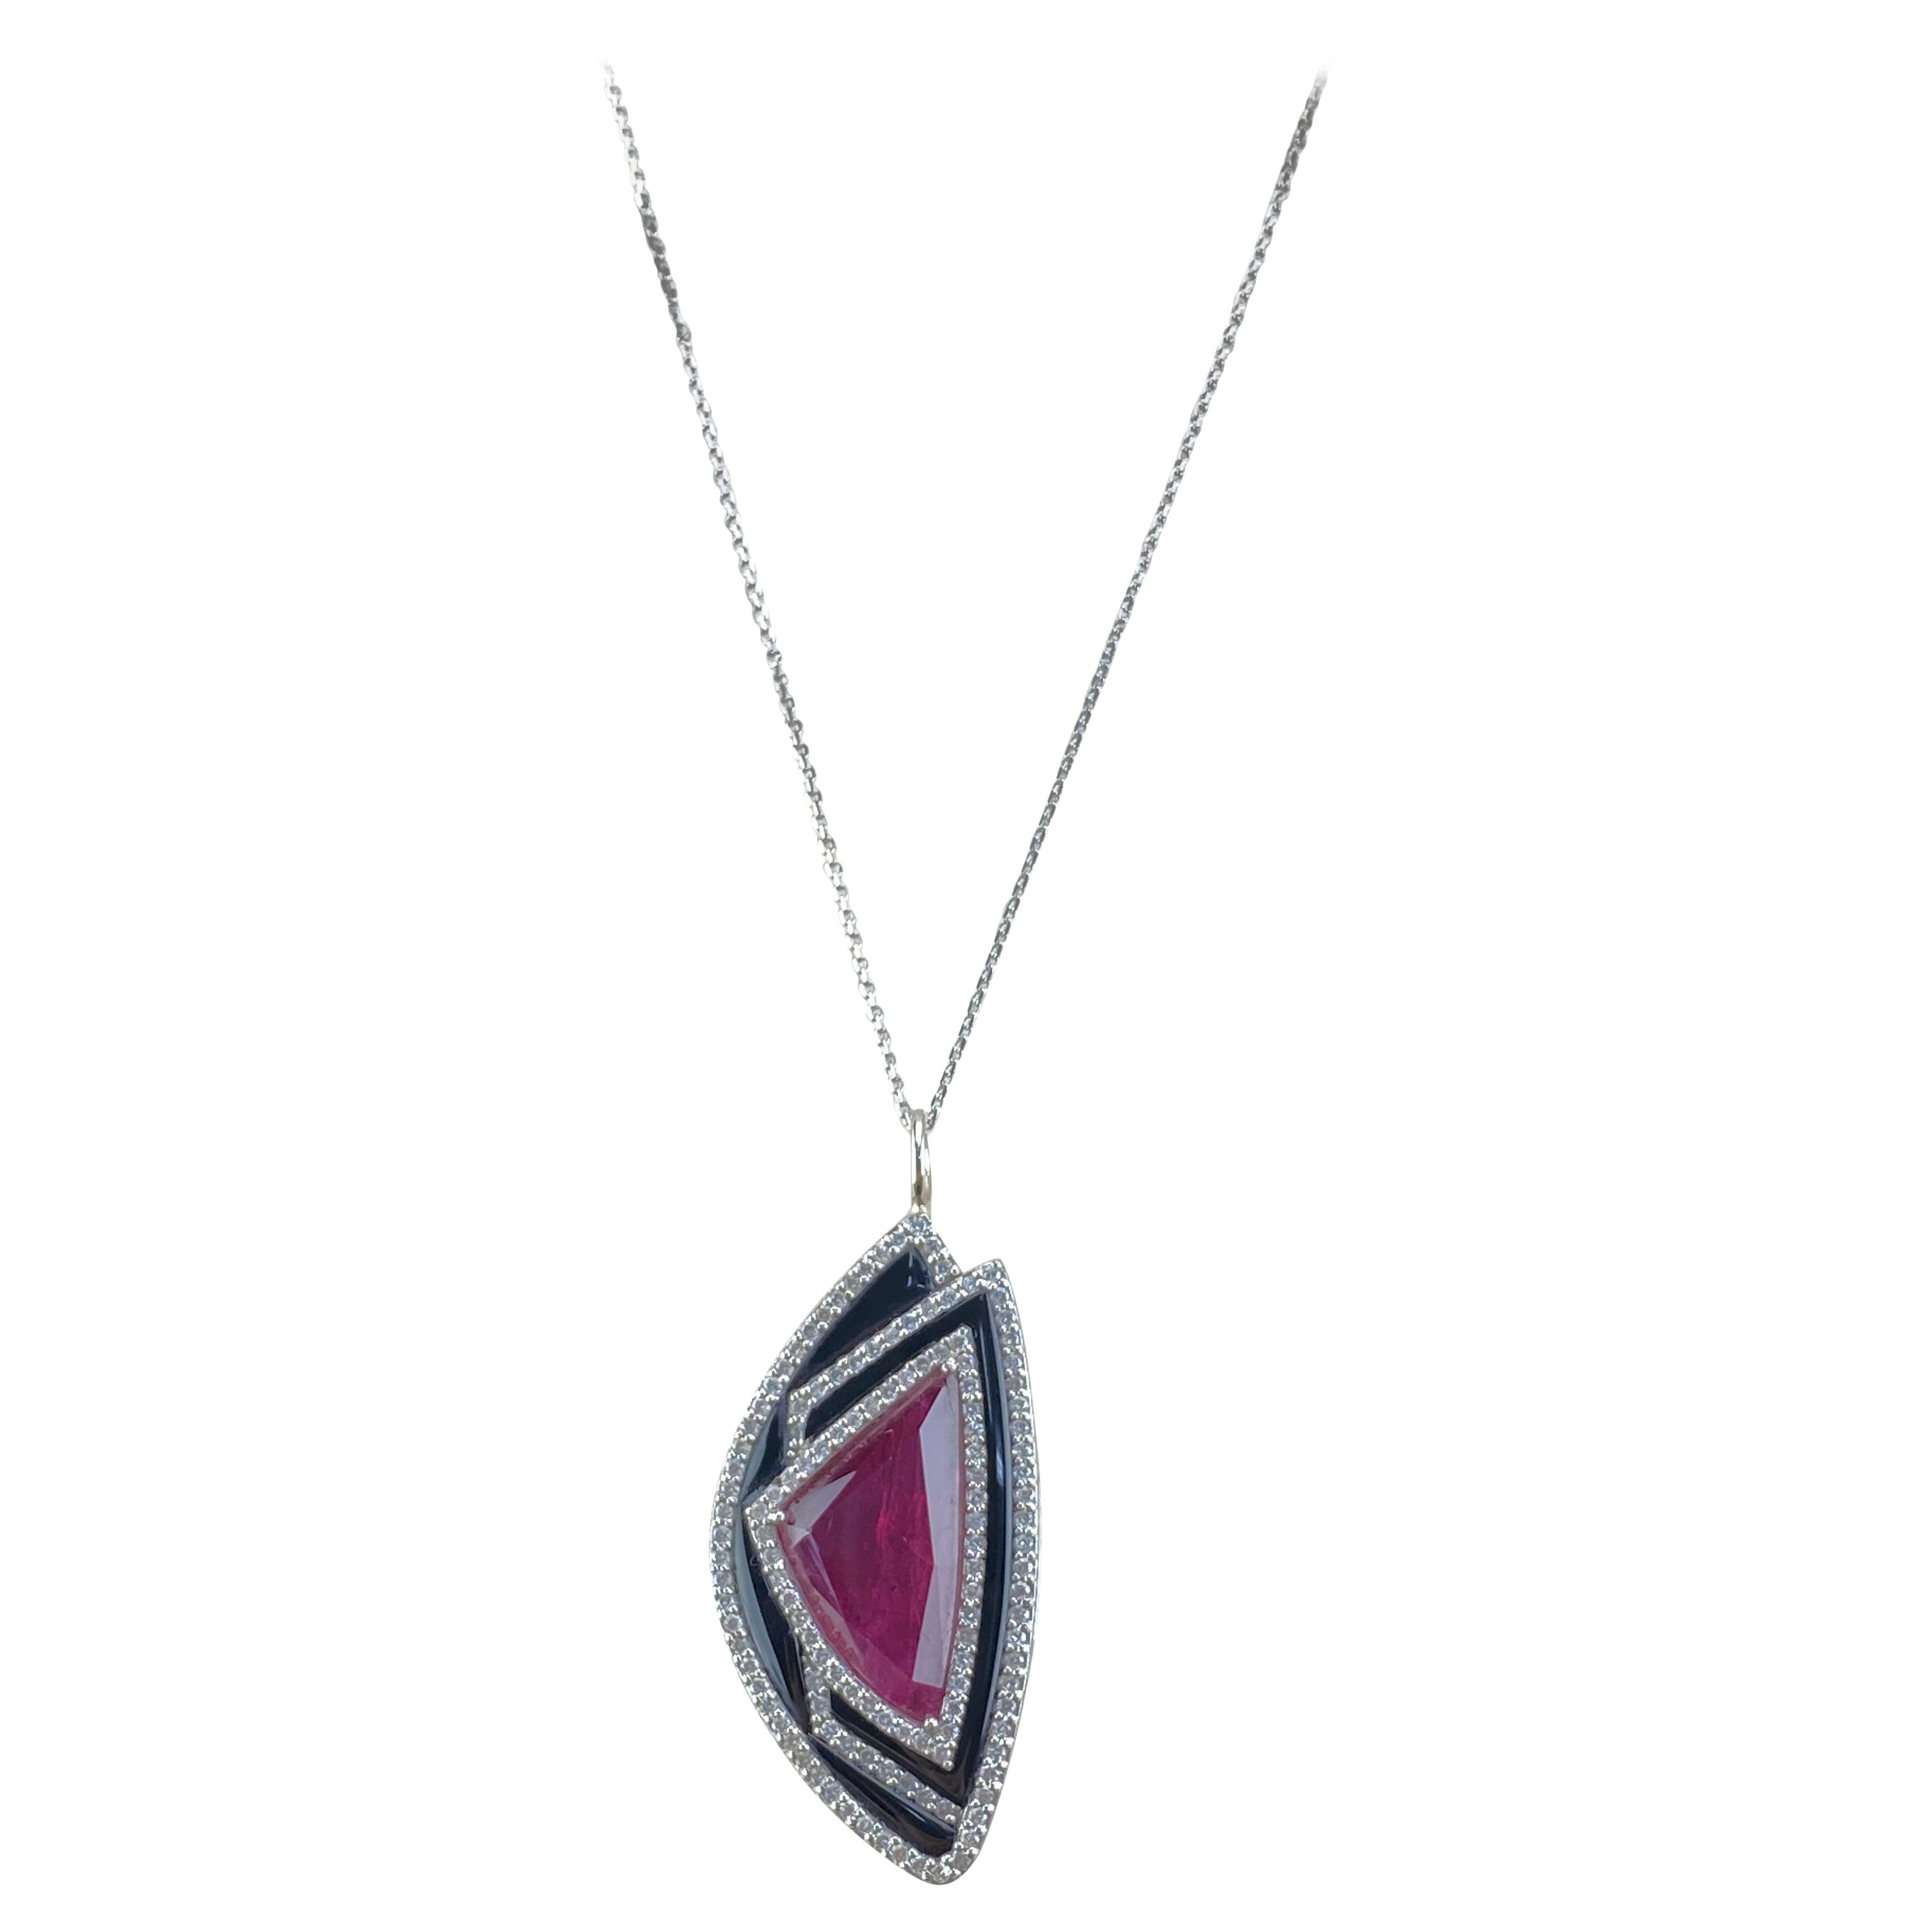 Certified 7.55 Carat No Heat Mozambique Ruby Pendant For Sale